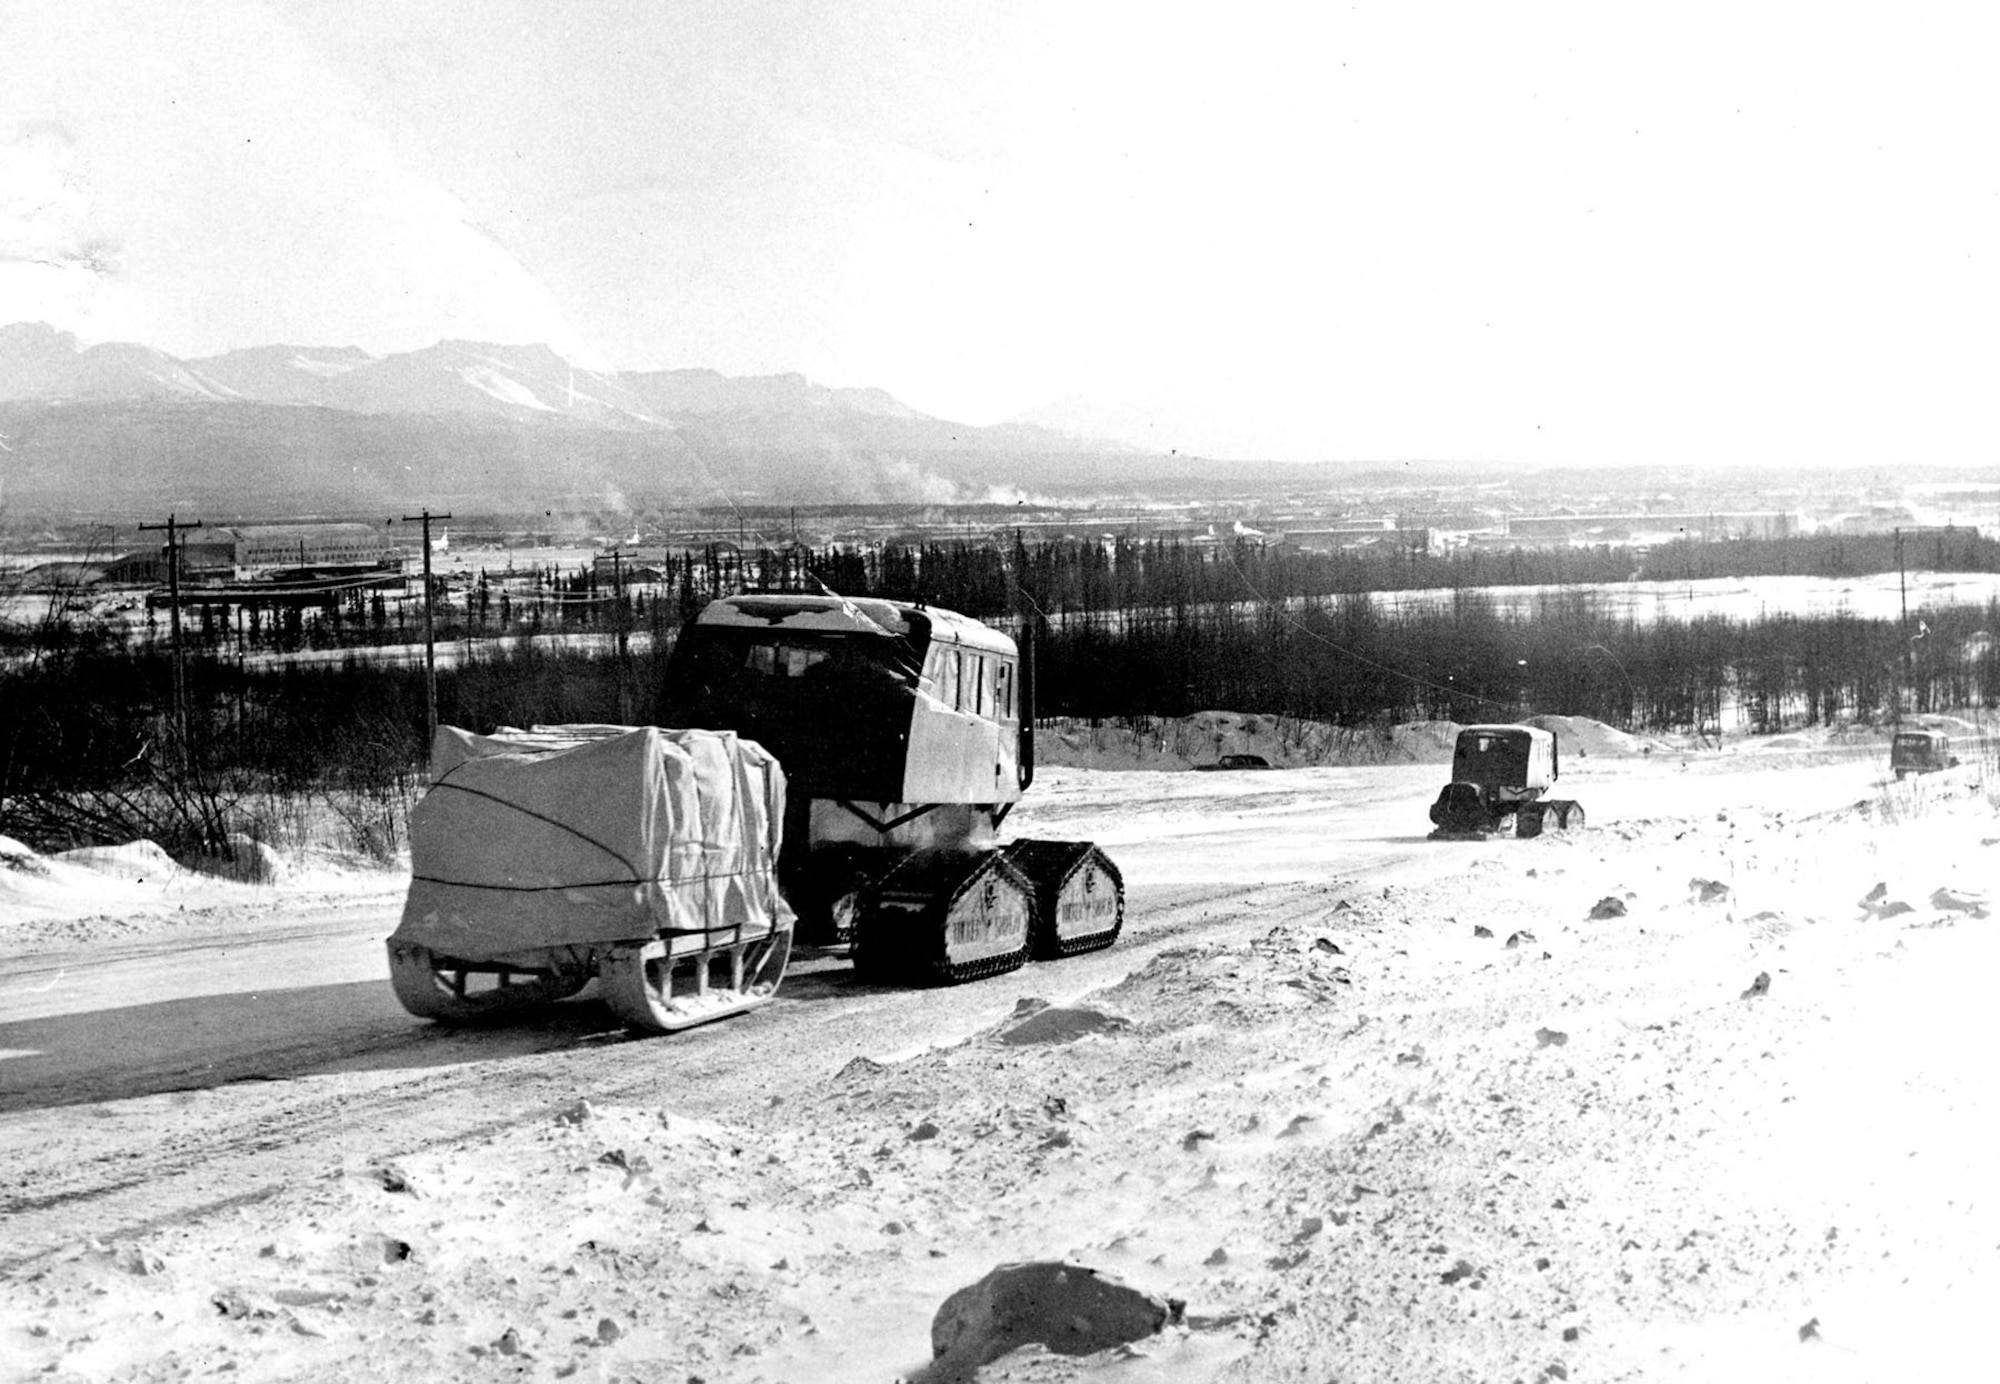 OSI’s “Alaska Project” prepared for the possibility of a Russian invasion. Its main features were training observers and setting up stores of supplies in the rugged Alaskan wilderness. These scenes depict daily life for agents in Alaska. (U.S. Air Force photo)